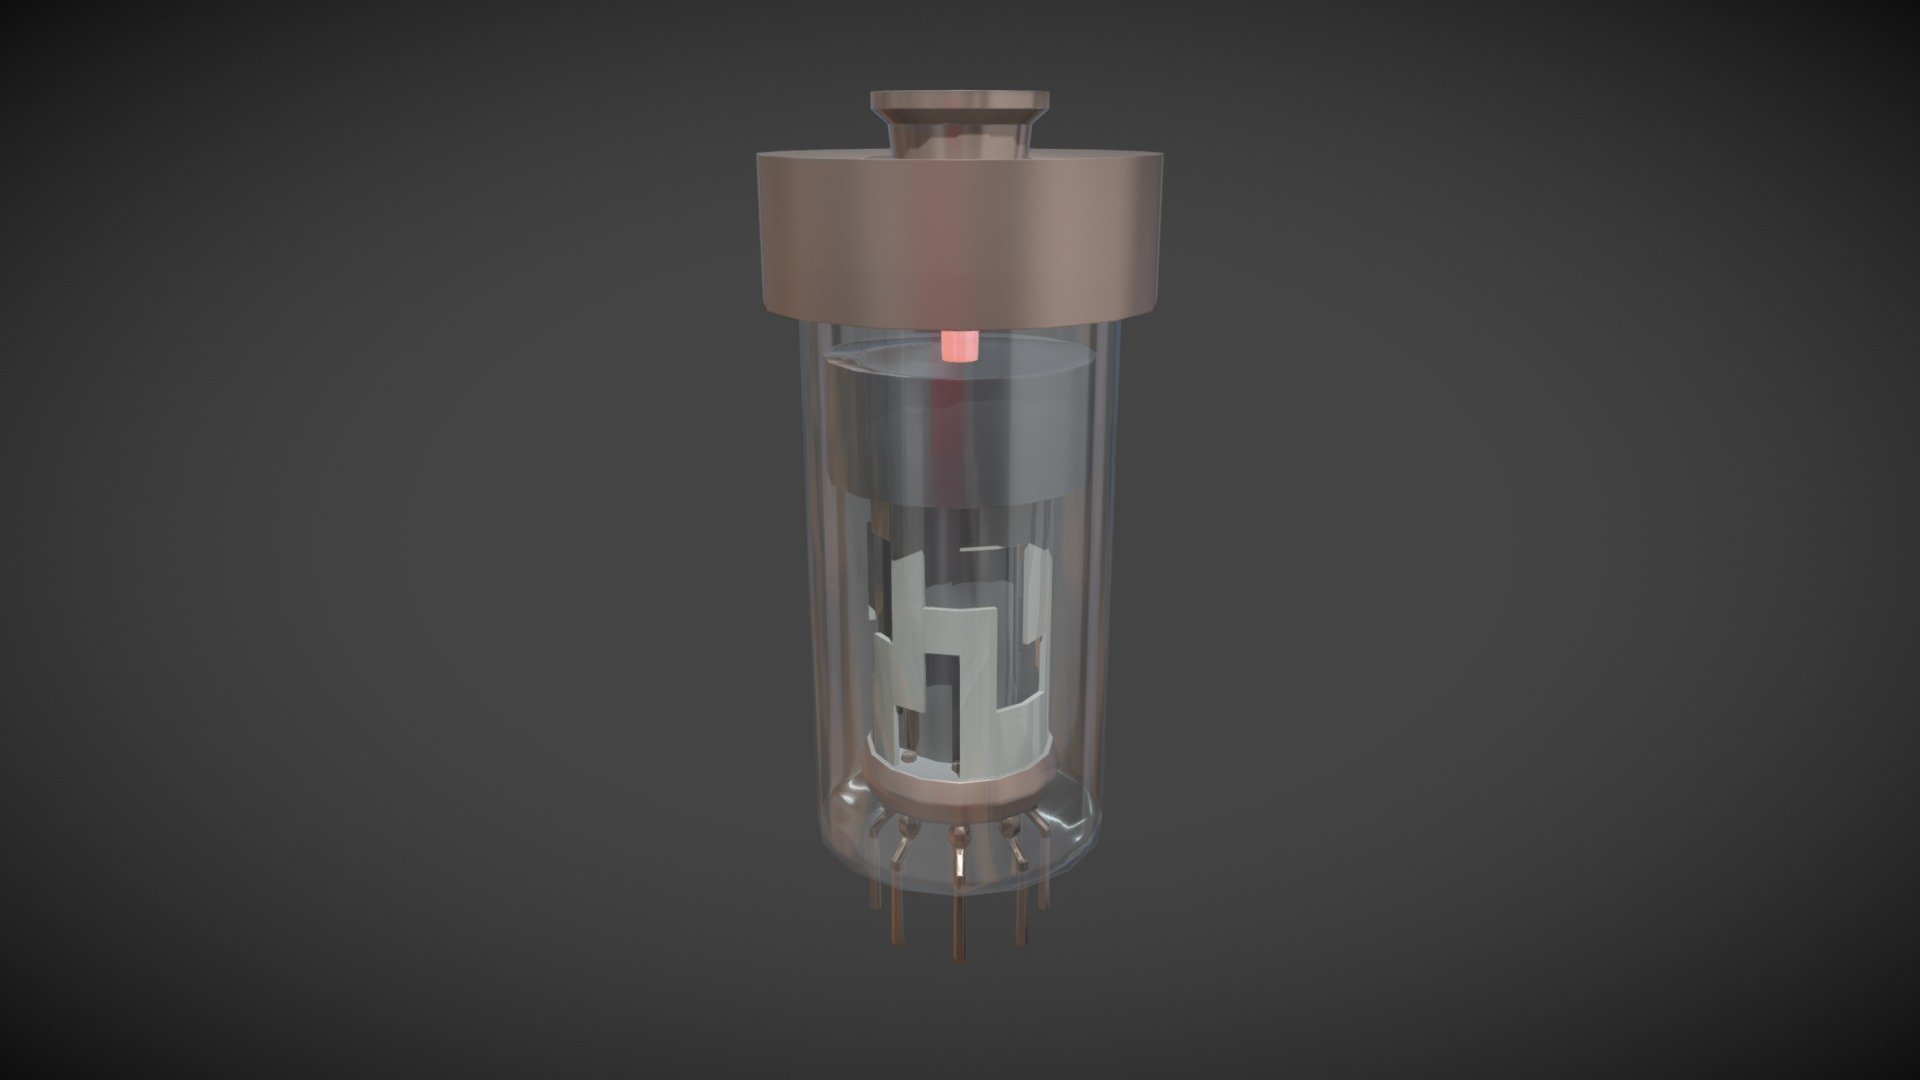 Vacuum Tube made for Space Station Zulu, a game project at UCF. This asset was featured in the Physics Lab of the game 3d model